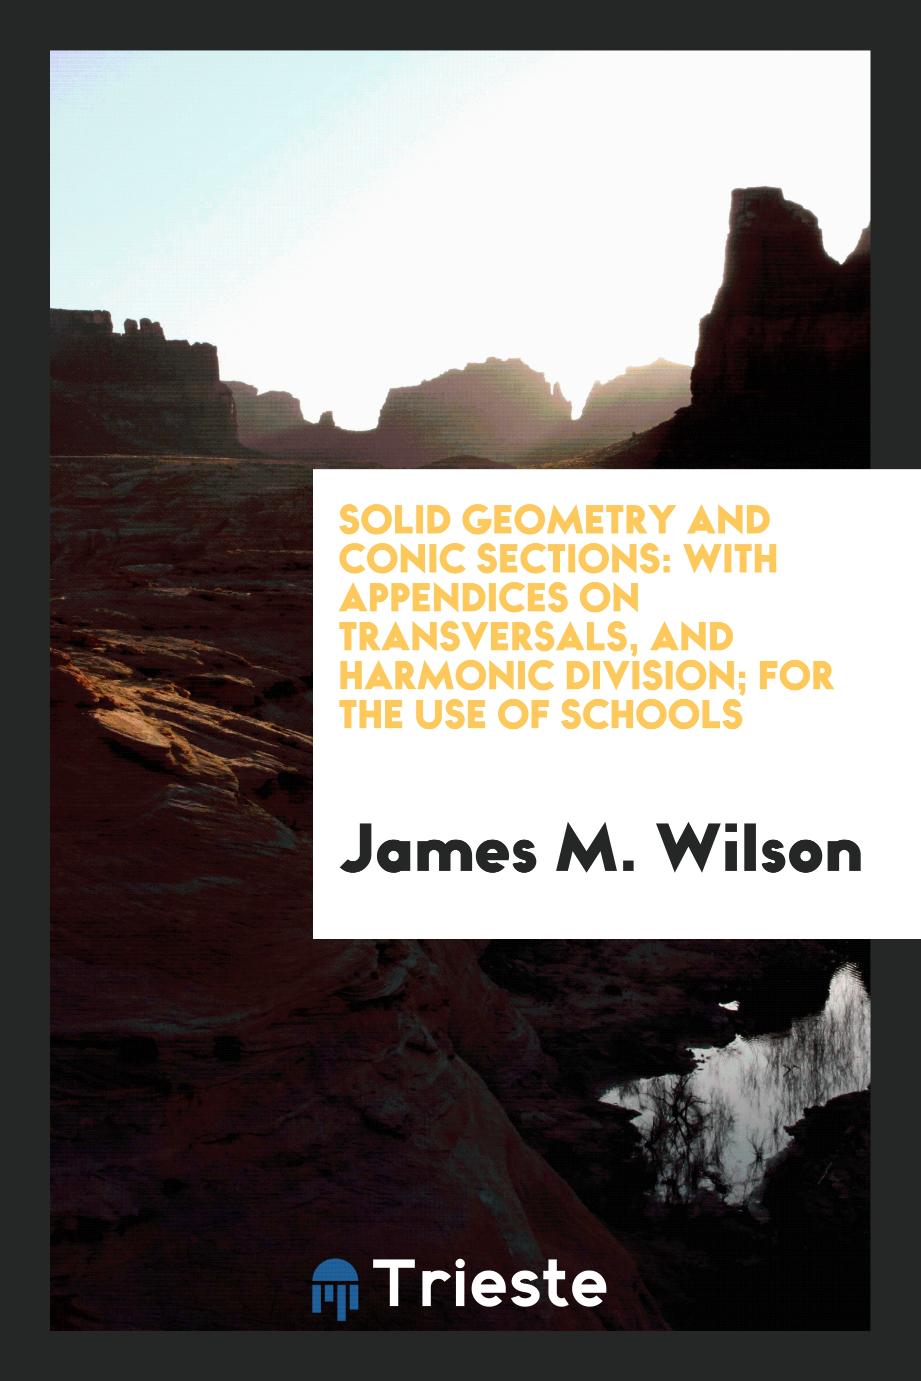 Solid Geometry and Conic Sections: With Appendices on Transversals, and Harmonic Division; For the Use of Schools